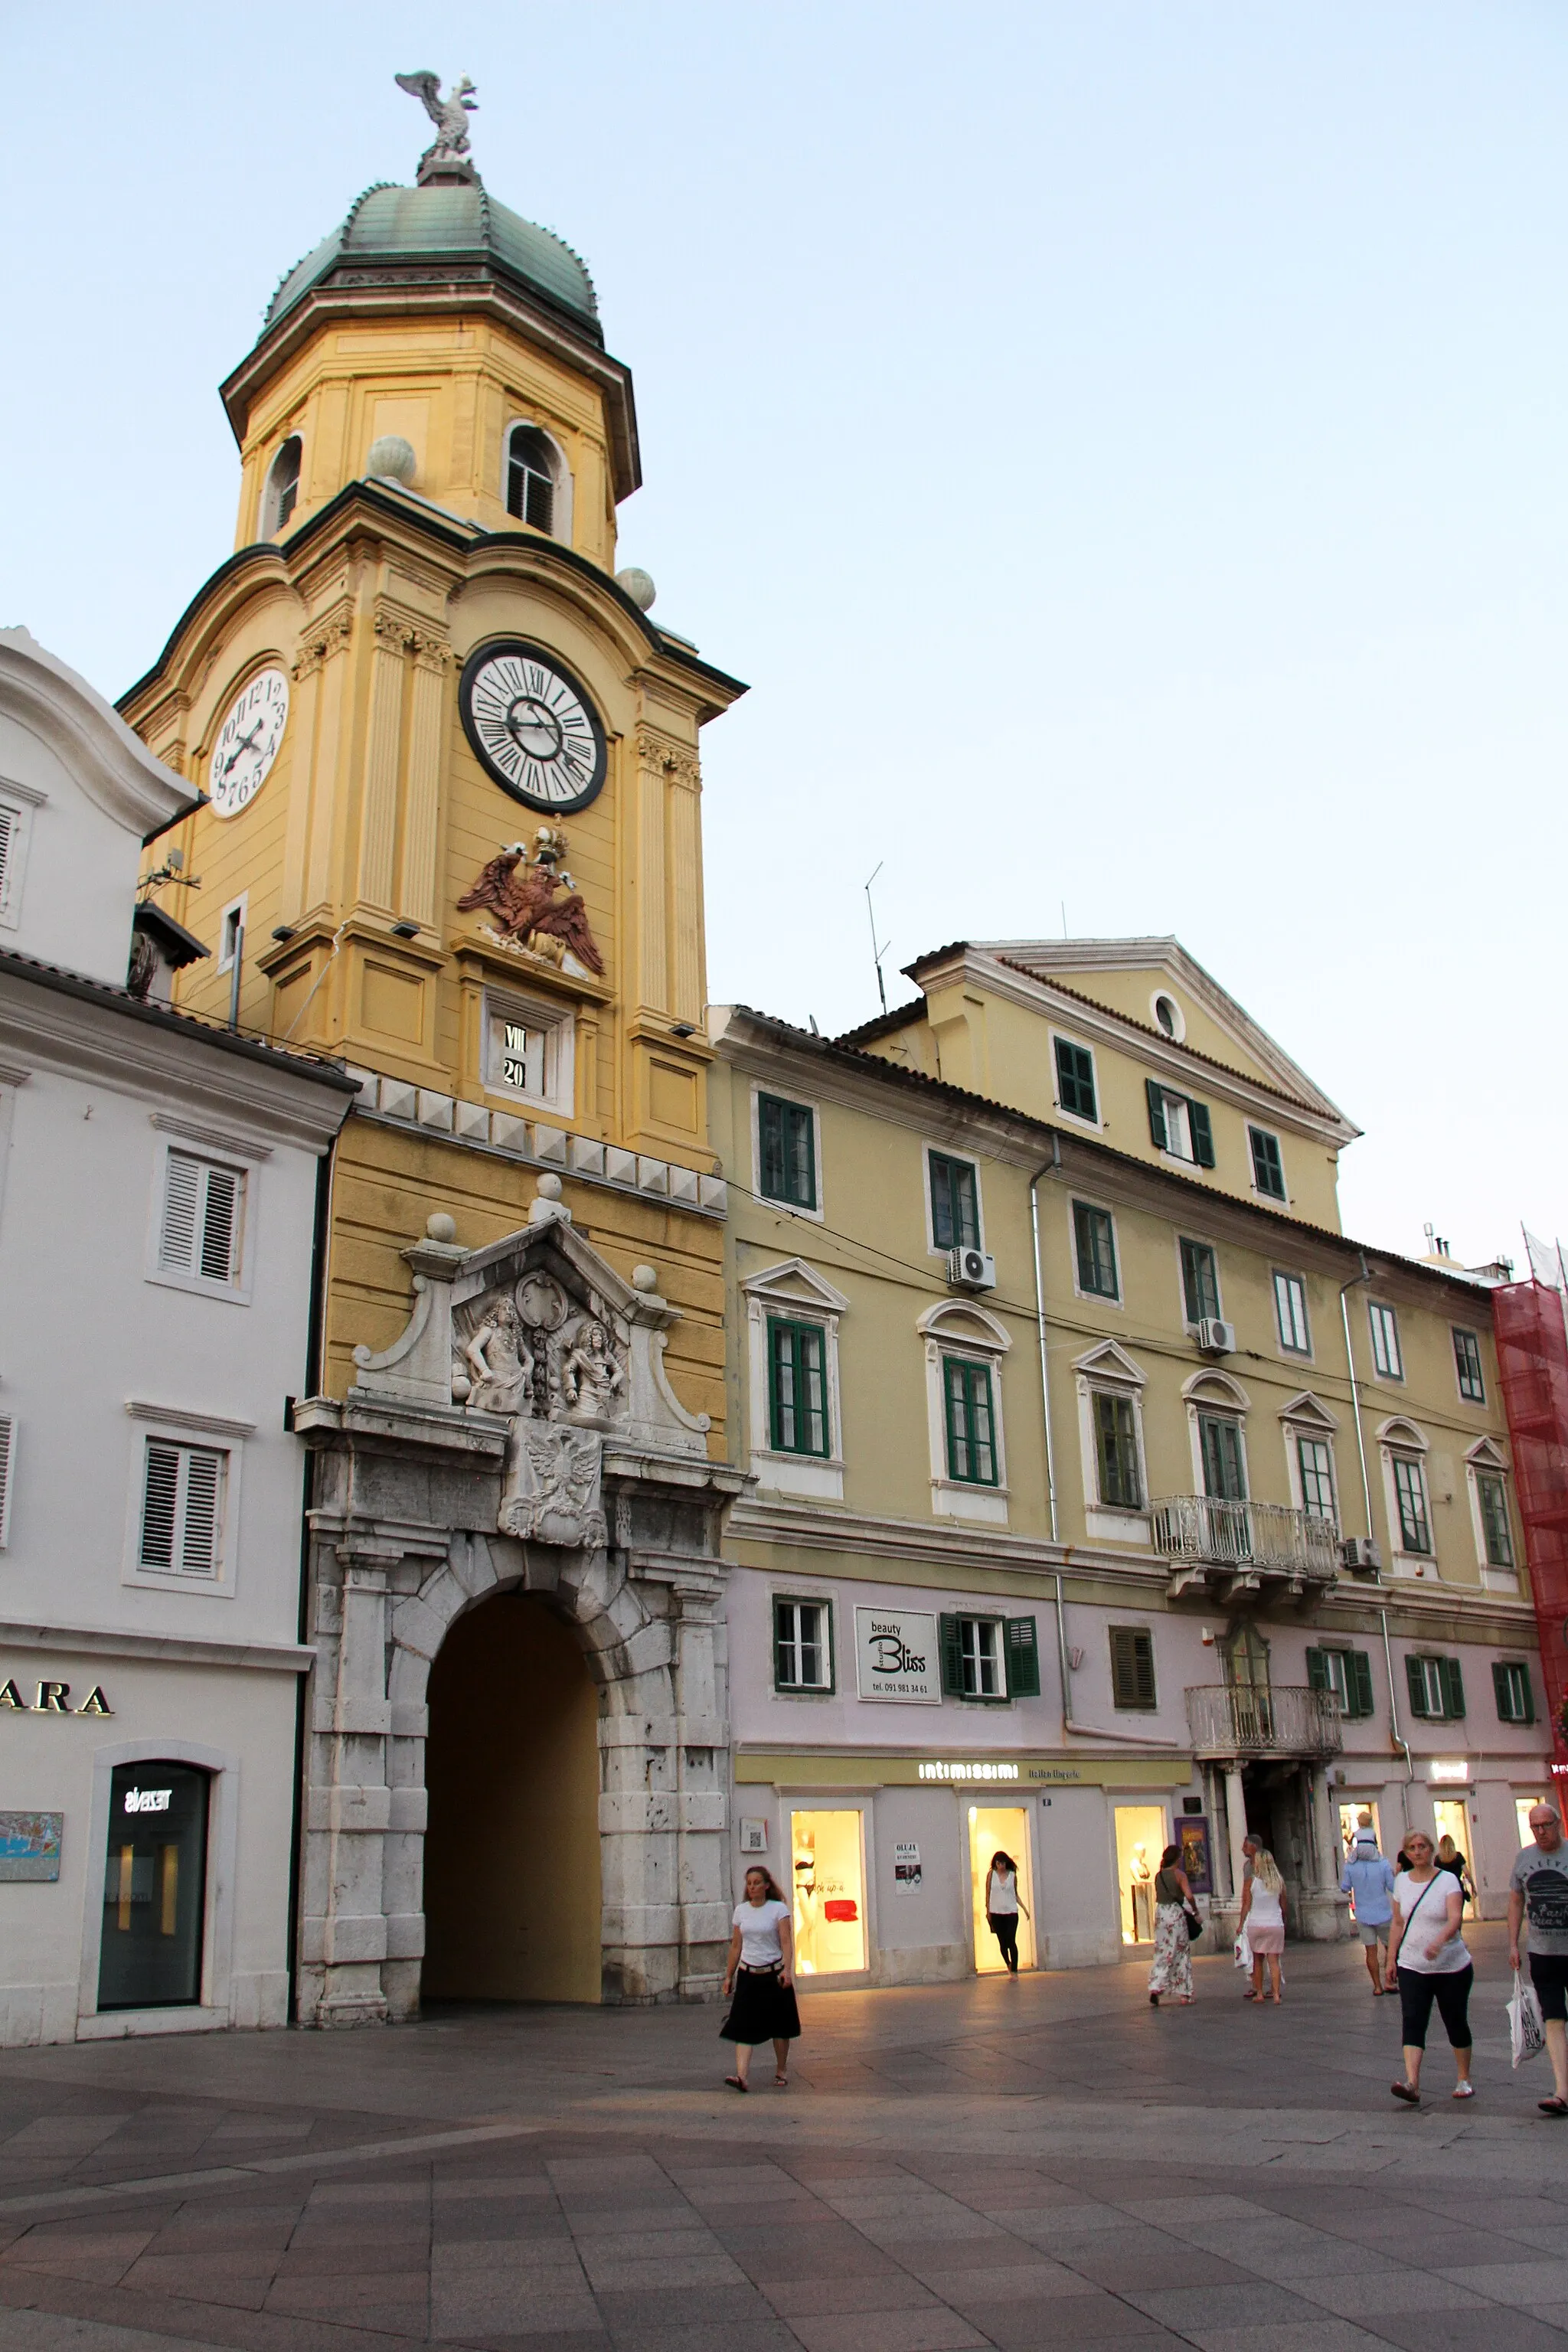 Photo showing: Luka - Korzo

City Clock Tower was built in the Middle Ages, probably on the foundations of the Late Antique littoral town gates. Some baroque phases of its construction can be seen on the lower part of the front of the Tower, which are characterised by a richly decorated portal, an imperial coat of arms carved out of stone and a relief of the Austrian emperors Leopold and Charles VI.